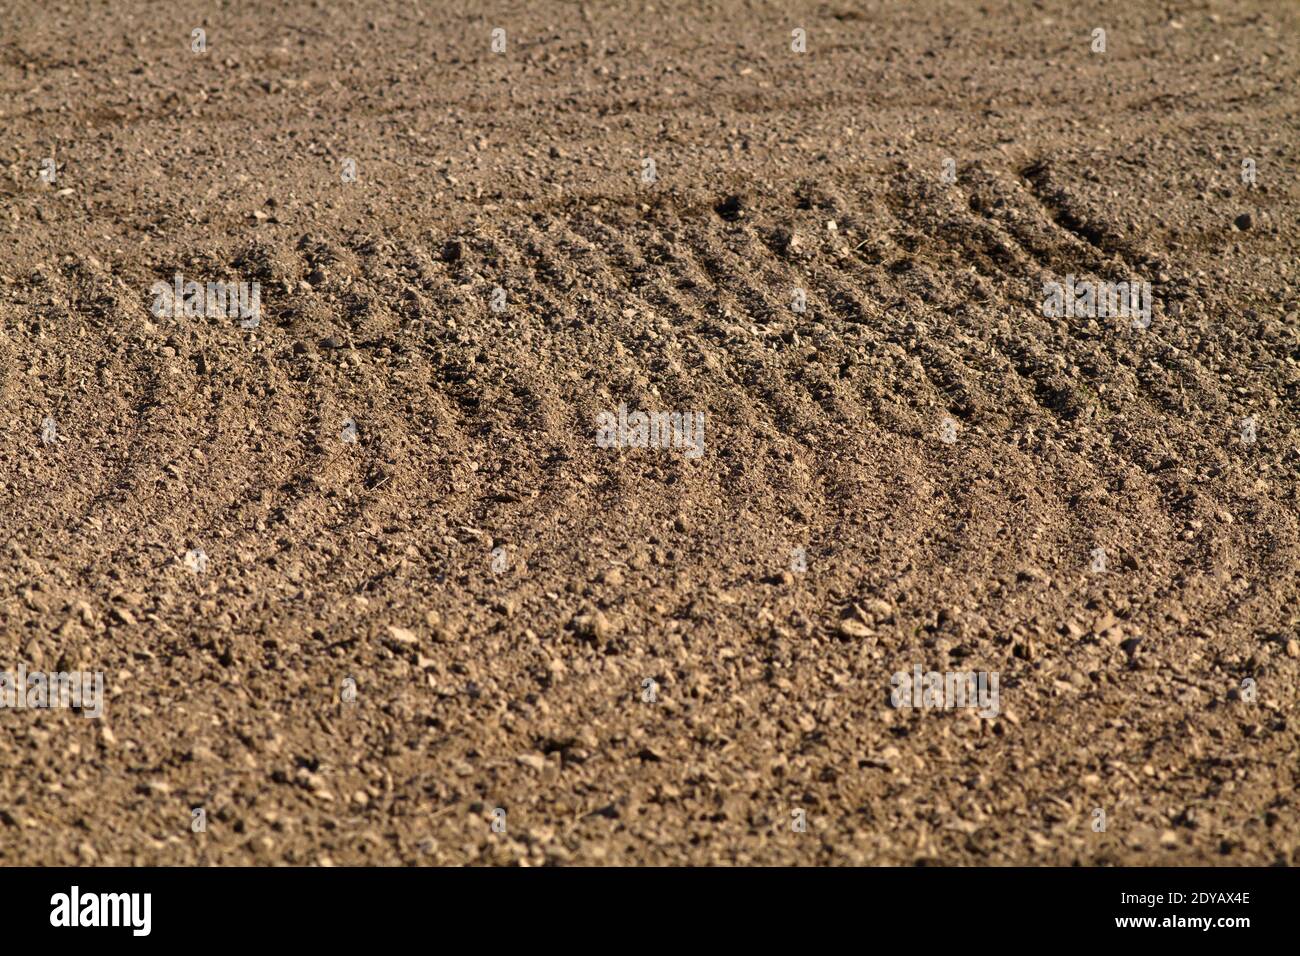 the pattern of furrows on a plowed field (selective focus) Stock Photo